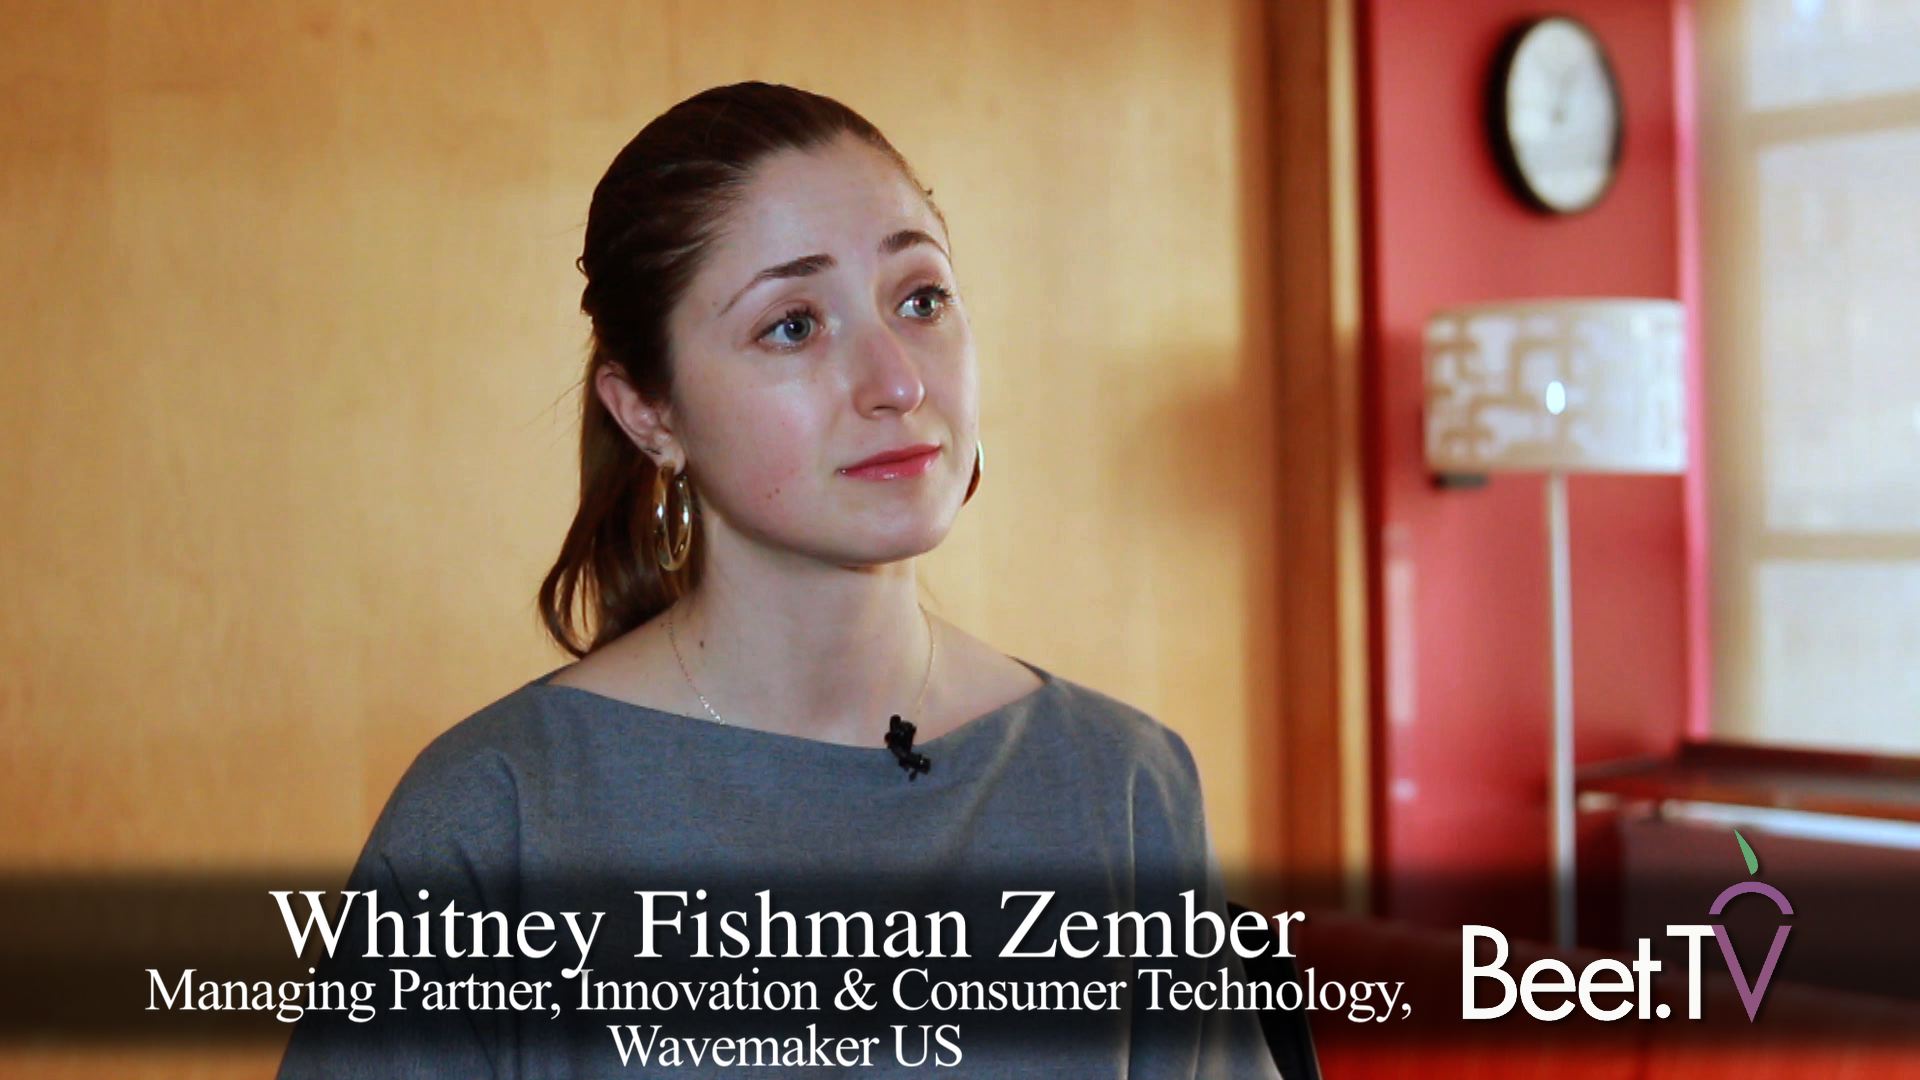 Wavemaker Credo: Understand Consumers And Their Purchase Journey, Then Choose Technology